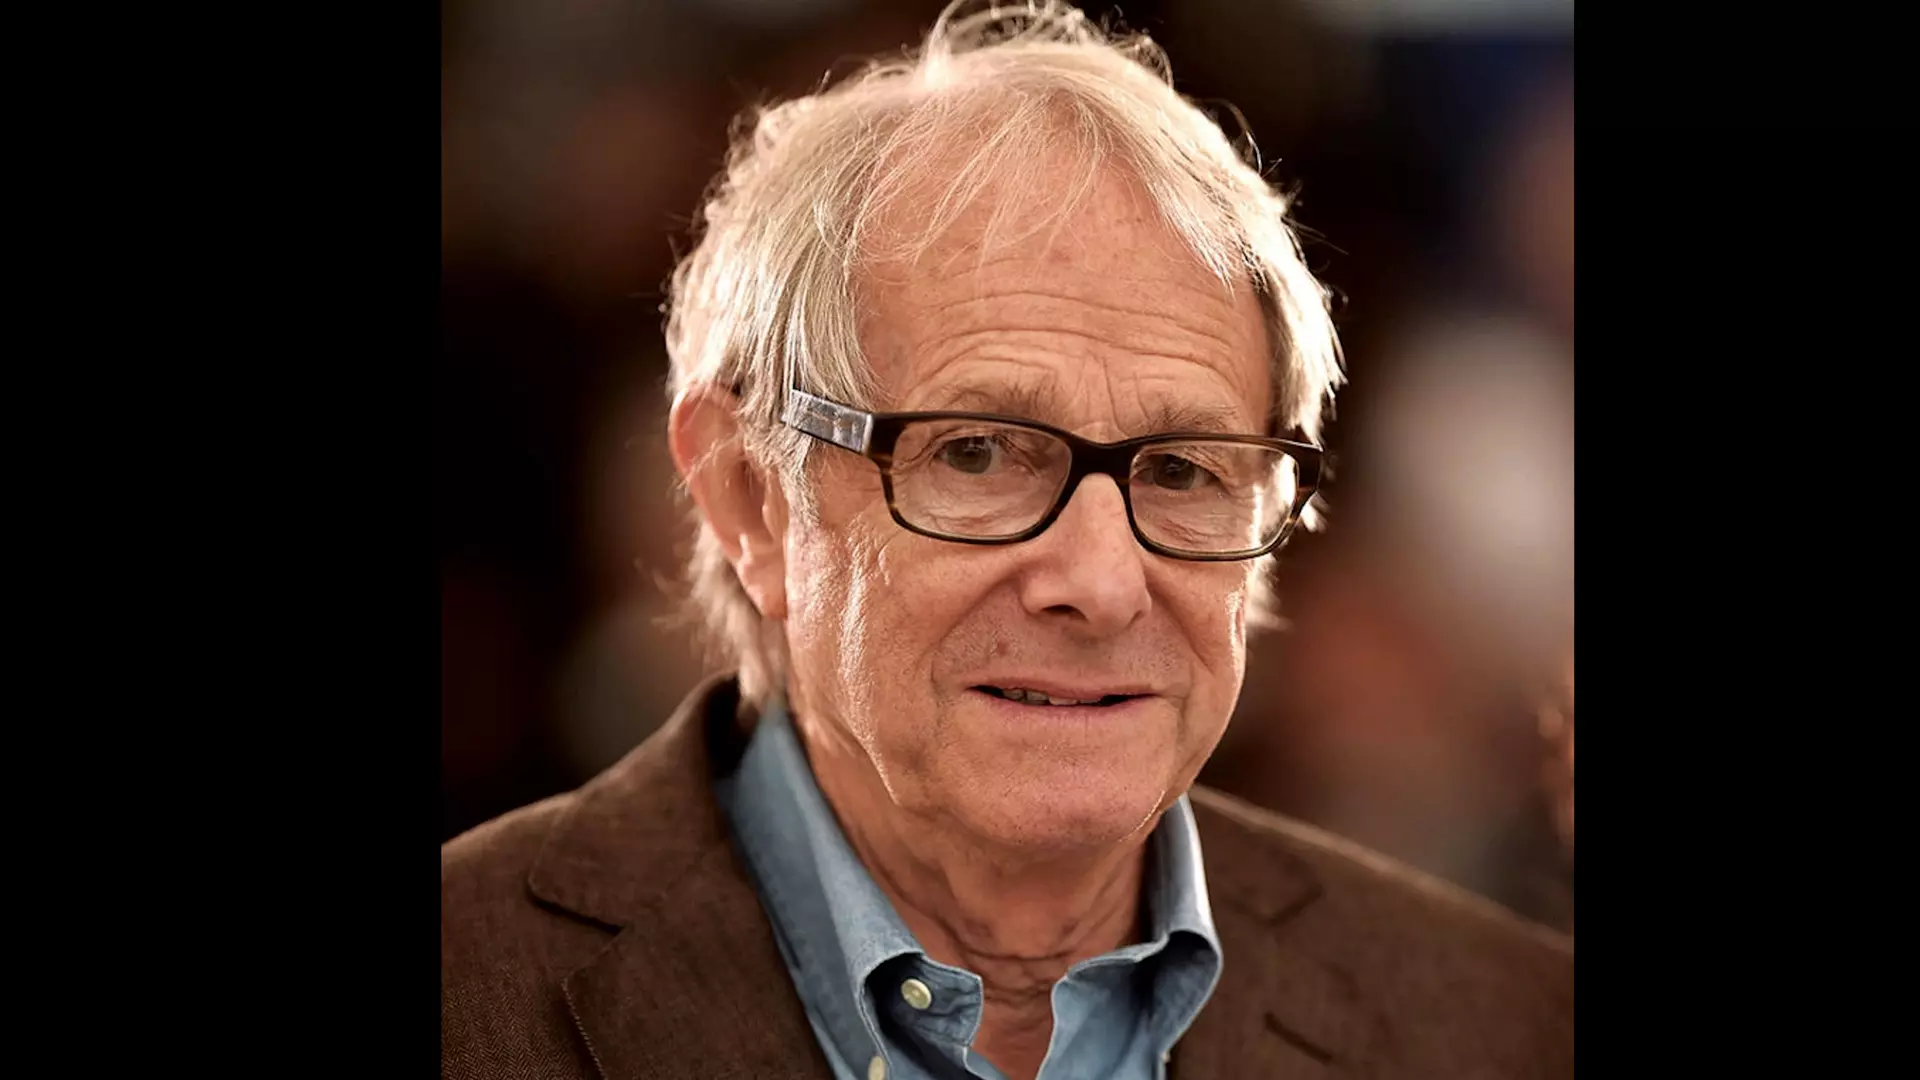 Ken Loach, an outspoken socialist and a champion of the working class, has made explicitly political films — his ode to the lives and struggles of ordinary people.